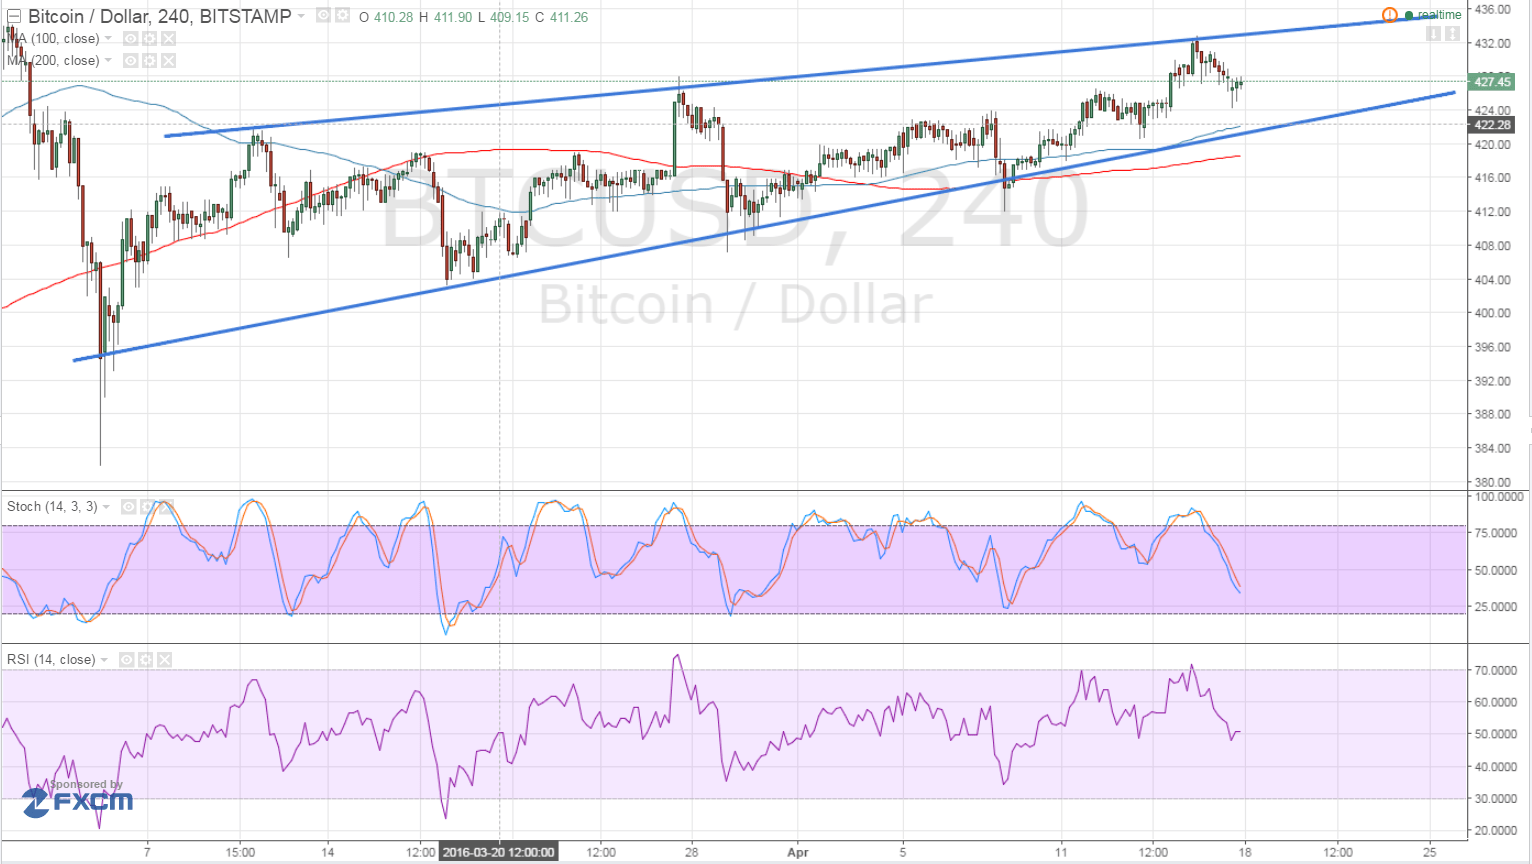 Bitcoin Price Technical Analysis for 04/18/2016 - Rising Wedge Spotted!